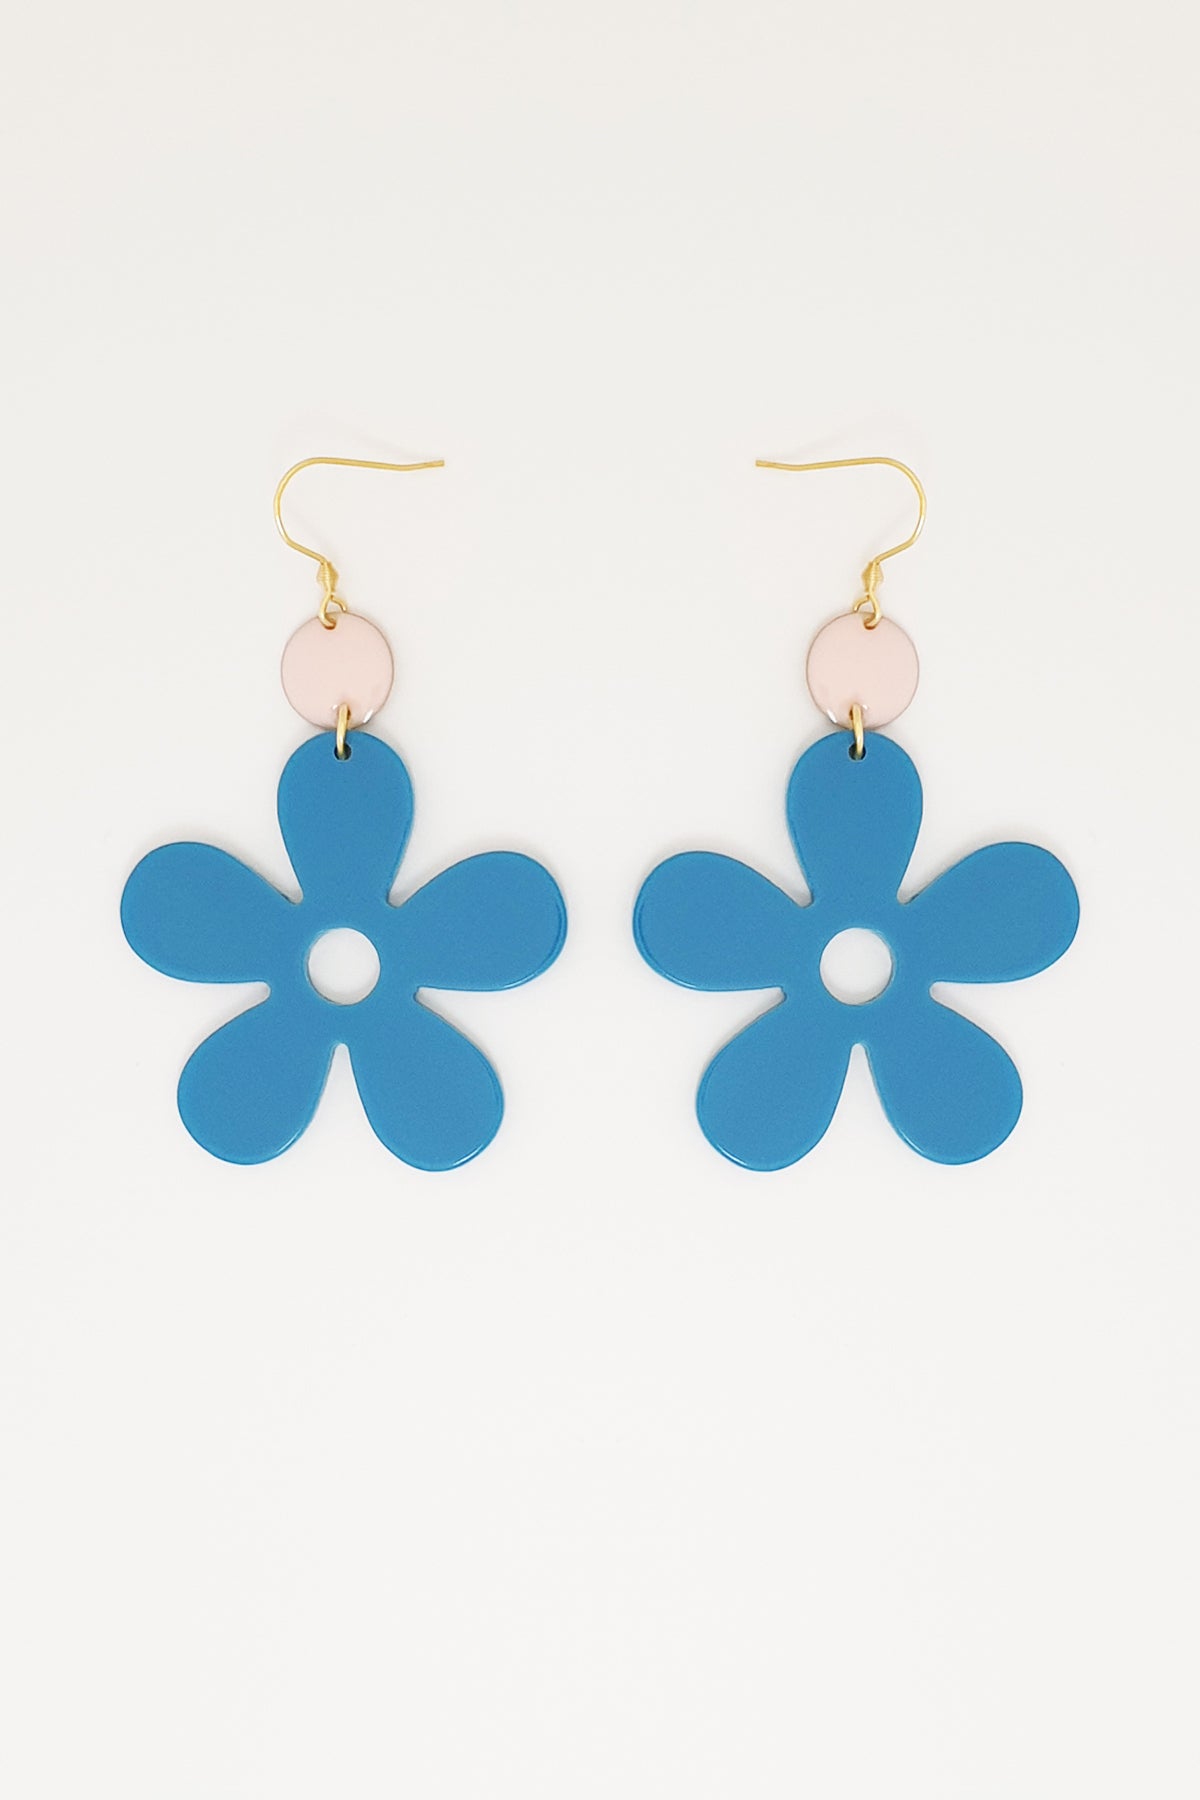 A pair of blue acrylic daisy dangle earrings with a light pink enamel dot attached to a hook. Pictured against a white background.